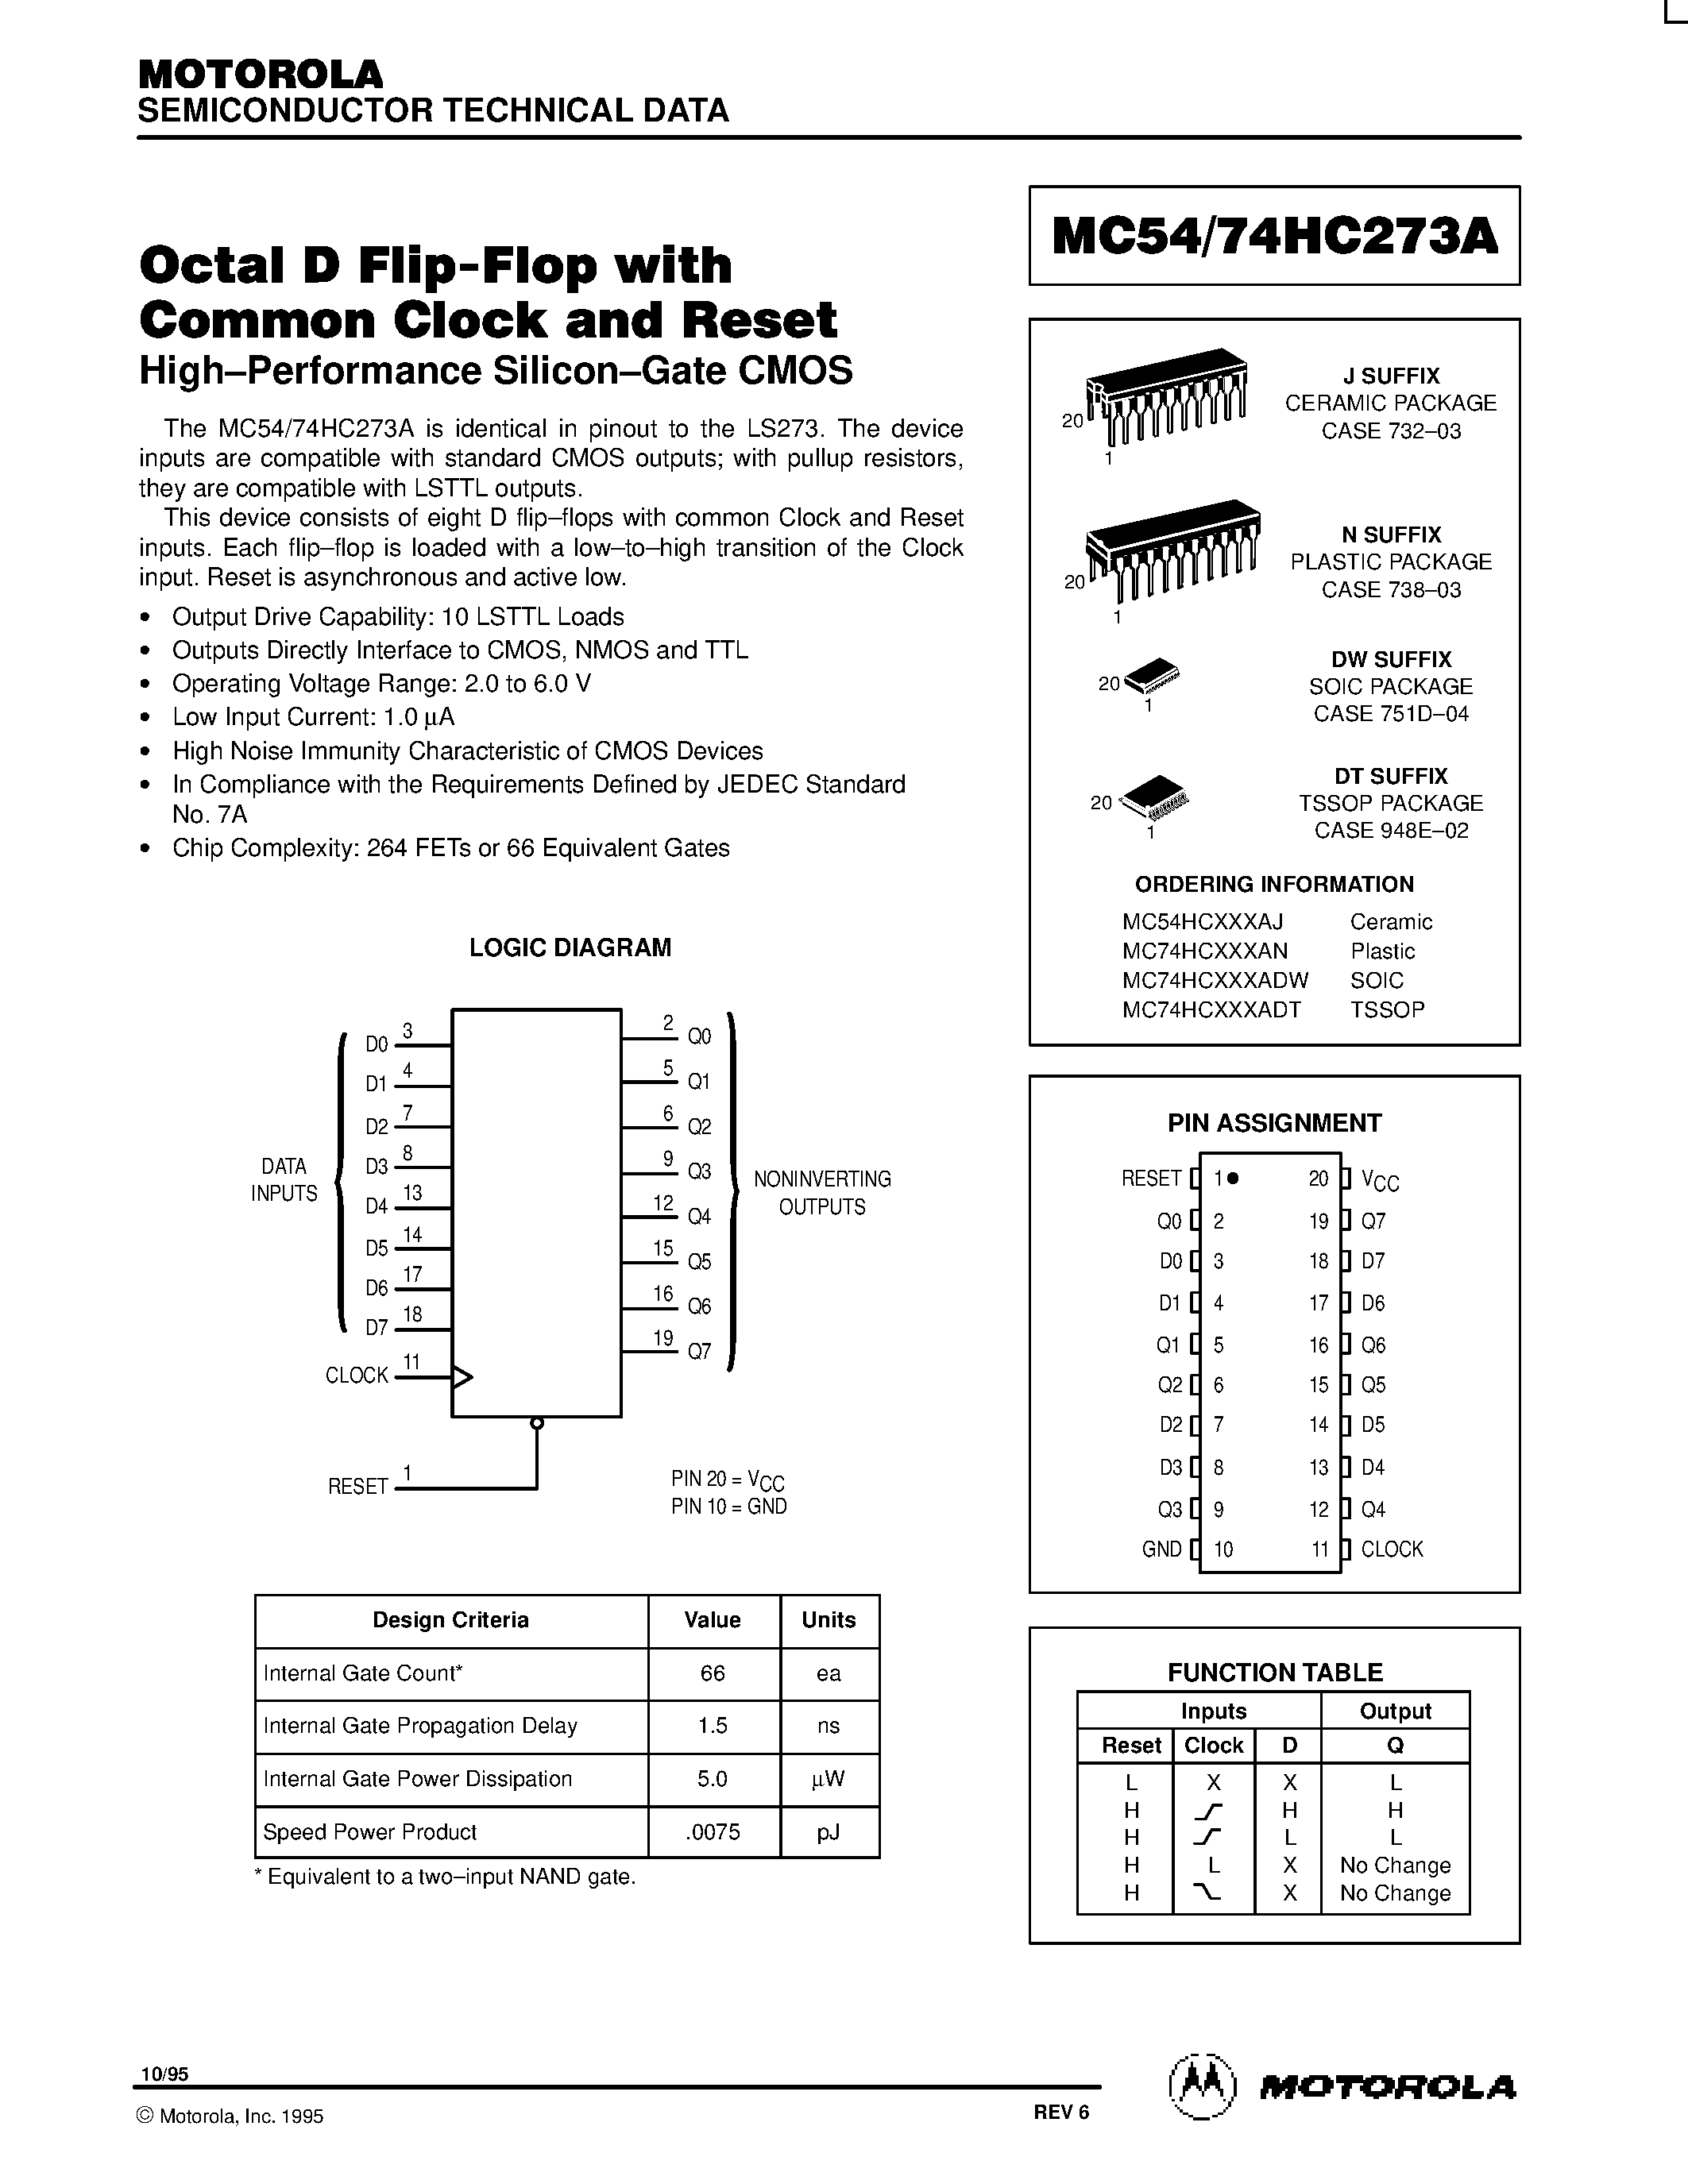 Datasheet 74273 - Octal D Flip-Flop with Common Clock and Reset page 1